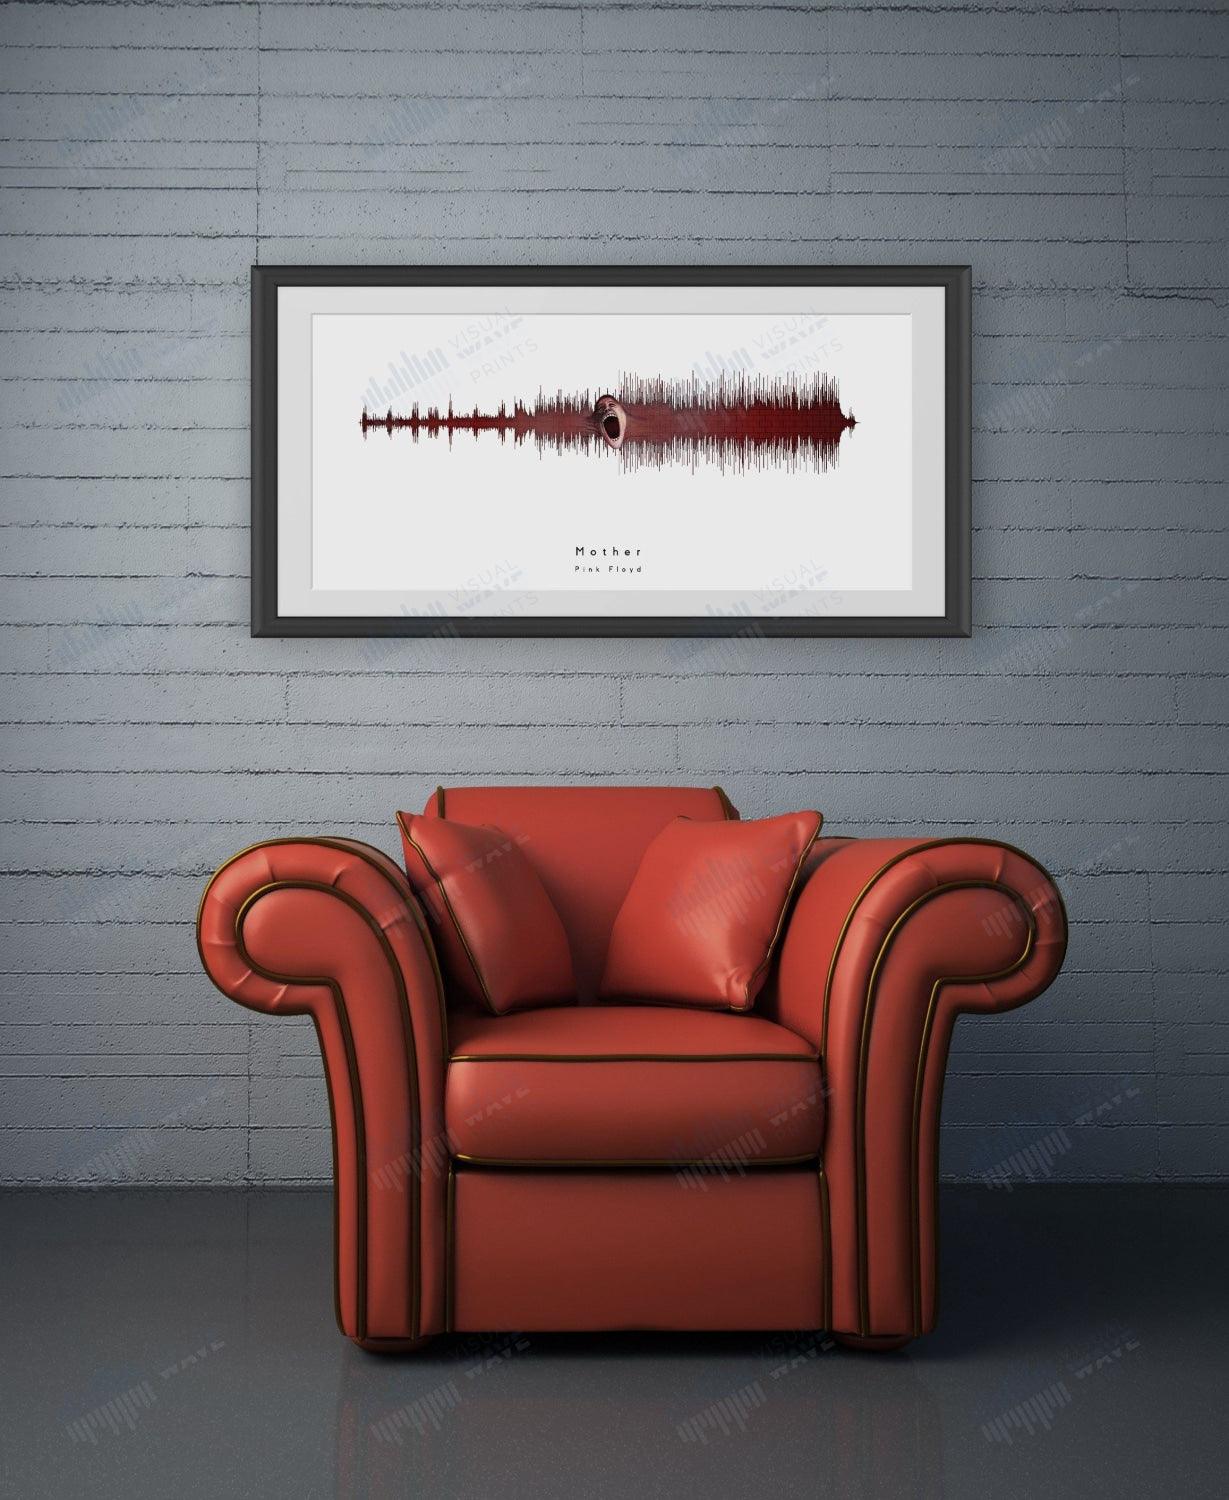 Mother by Pink Floyd - Visual Wave Prints